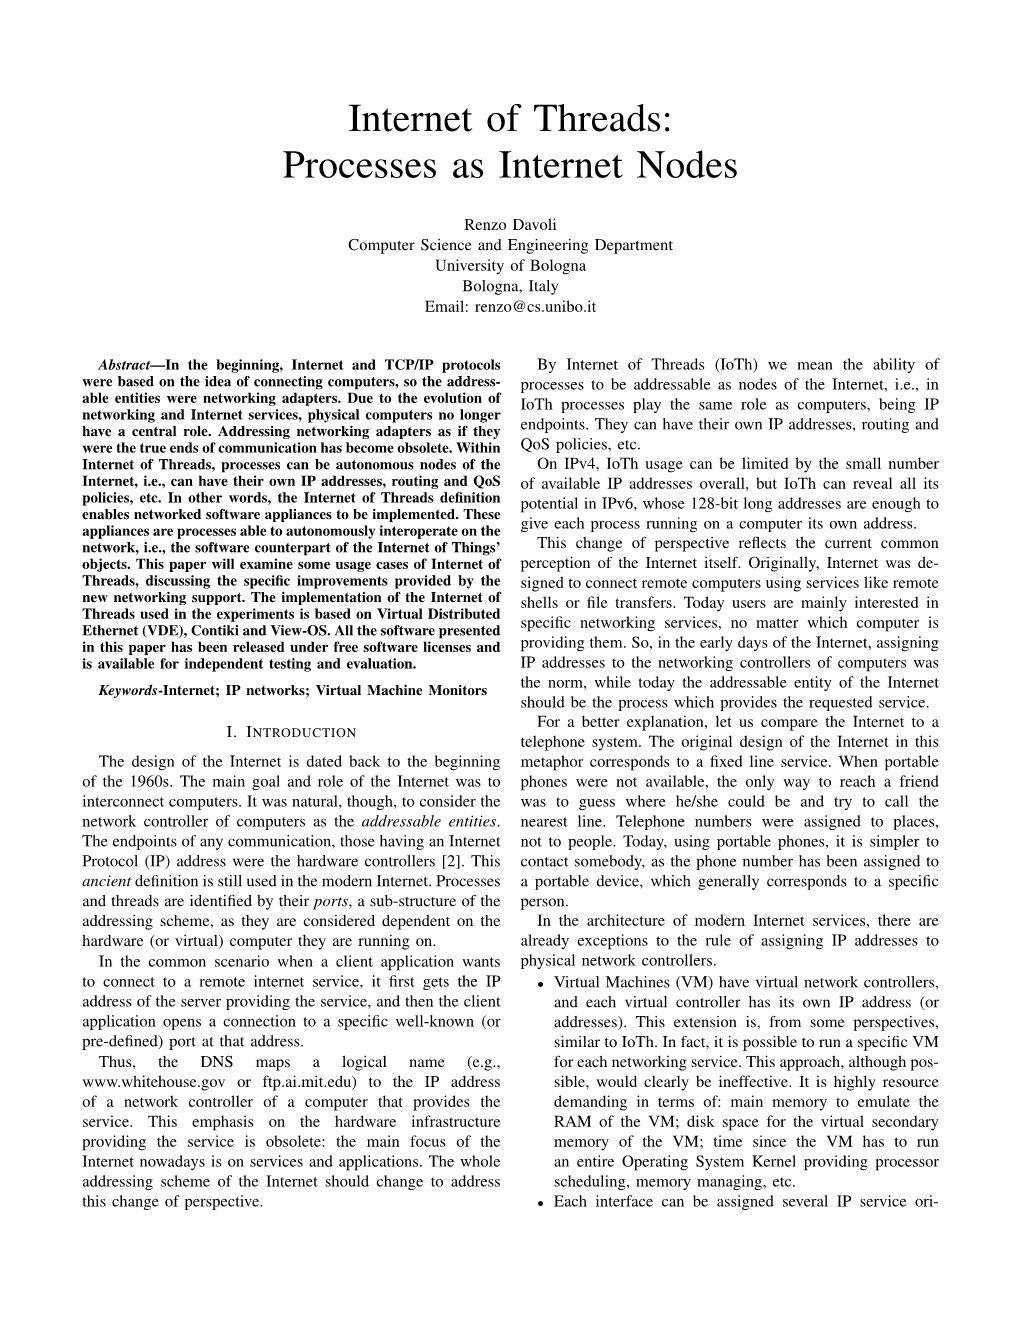 Internet of Threads: Processes As Internet Nodes